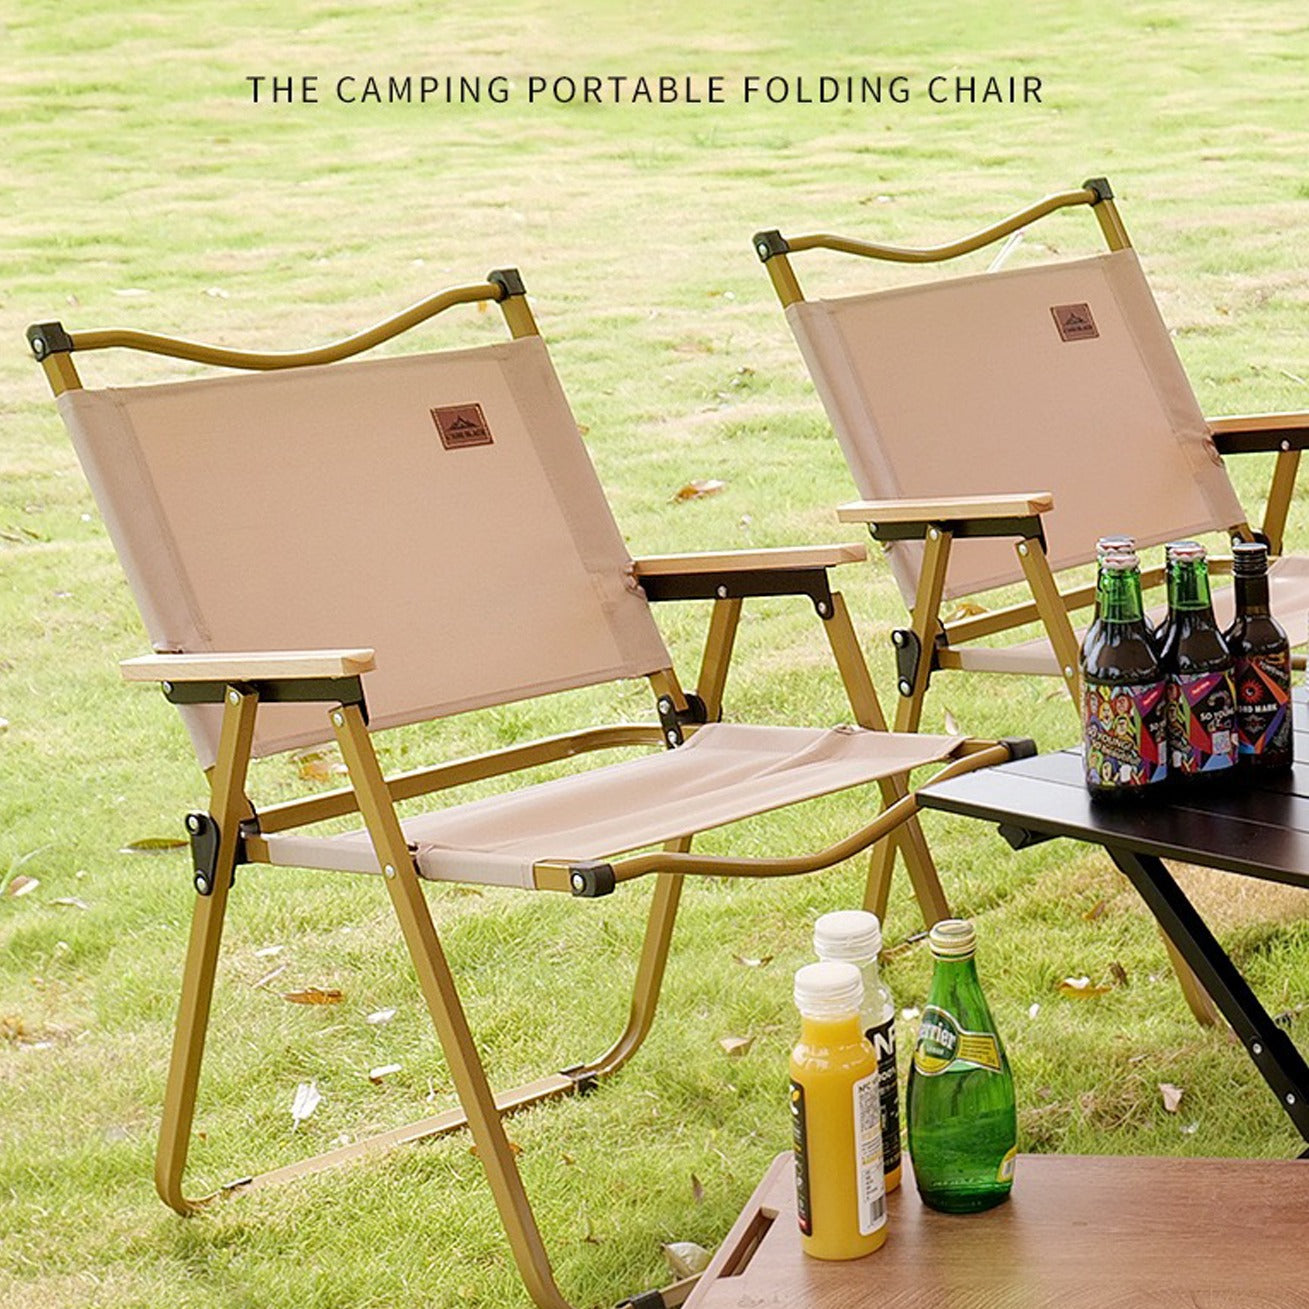 Portable Outdoor Camping Chair being used in a picnic at a park 